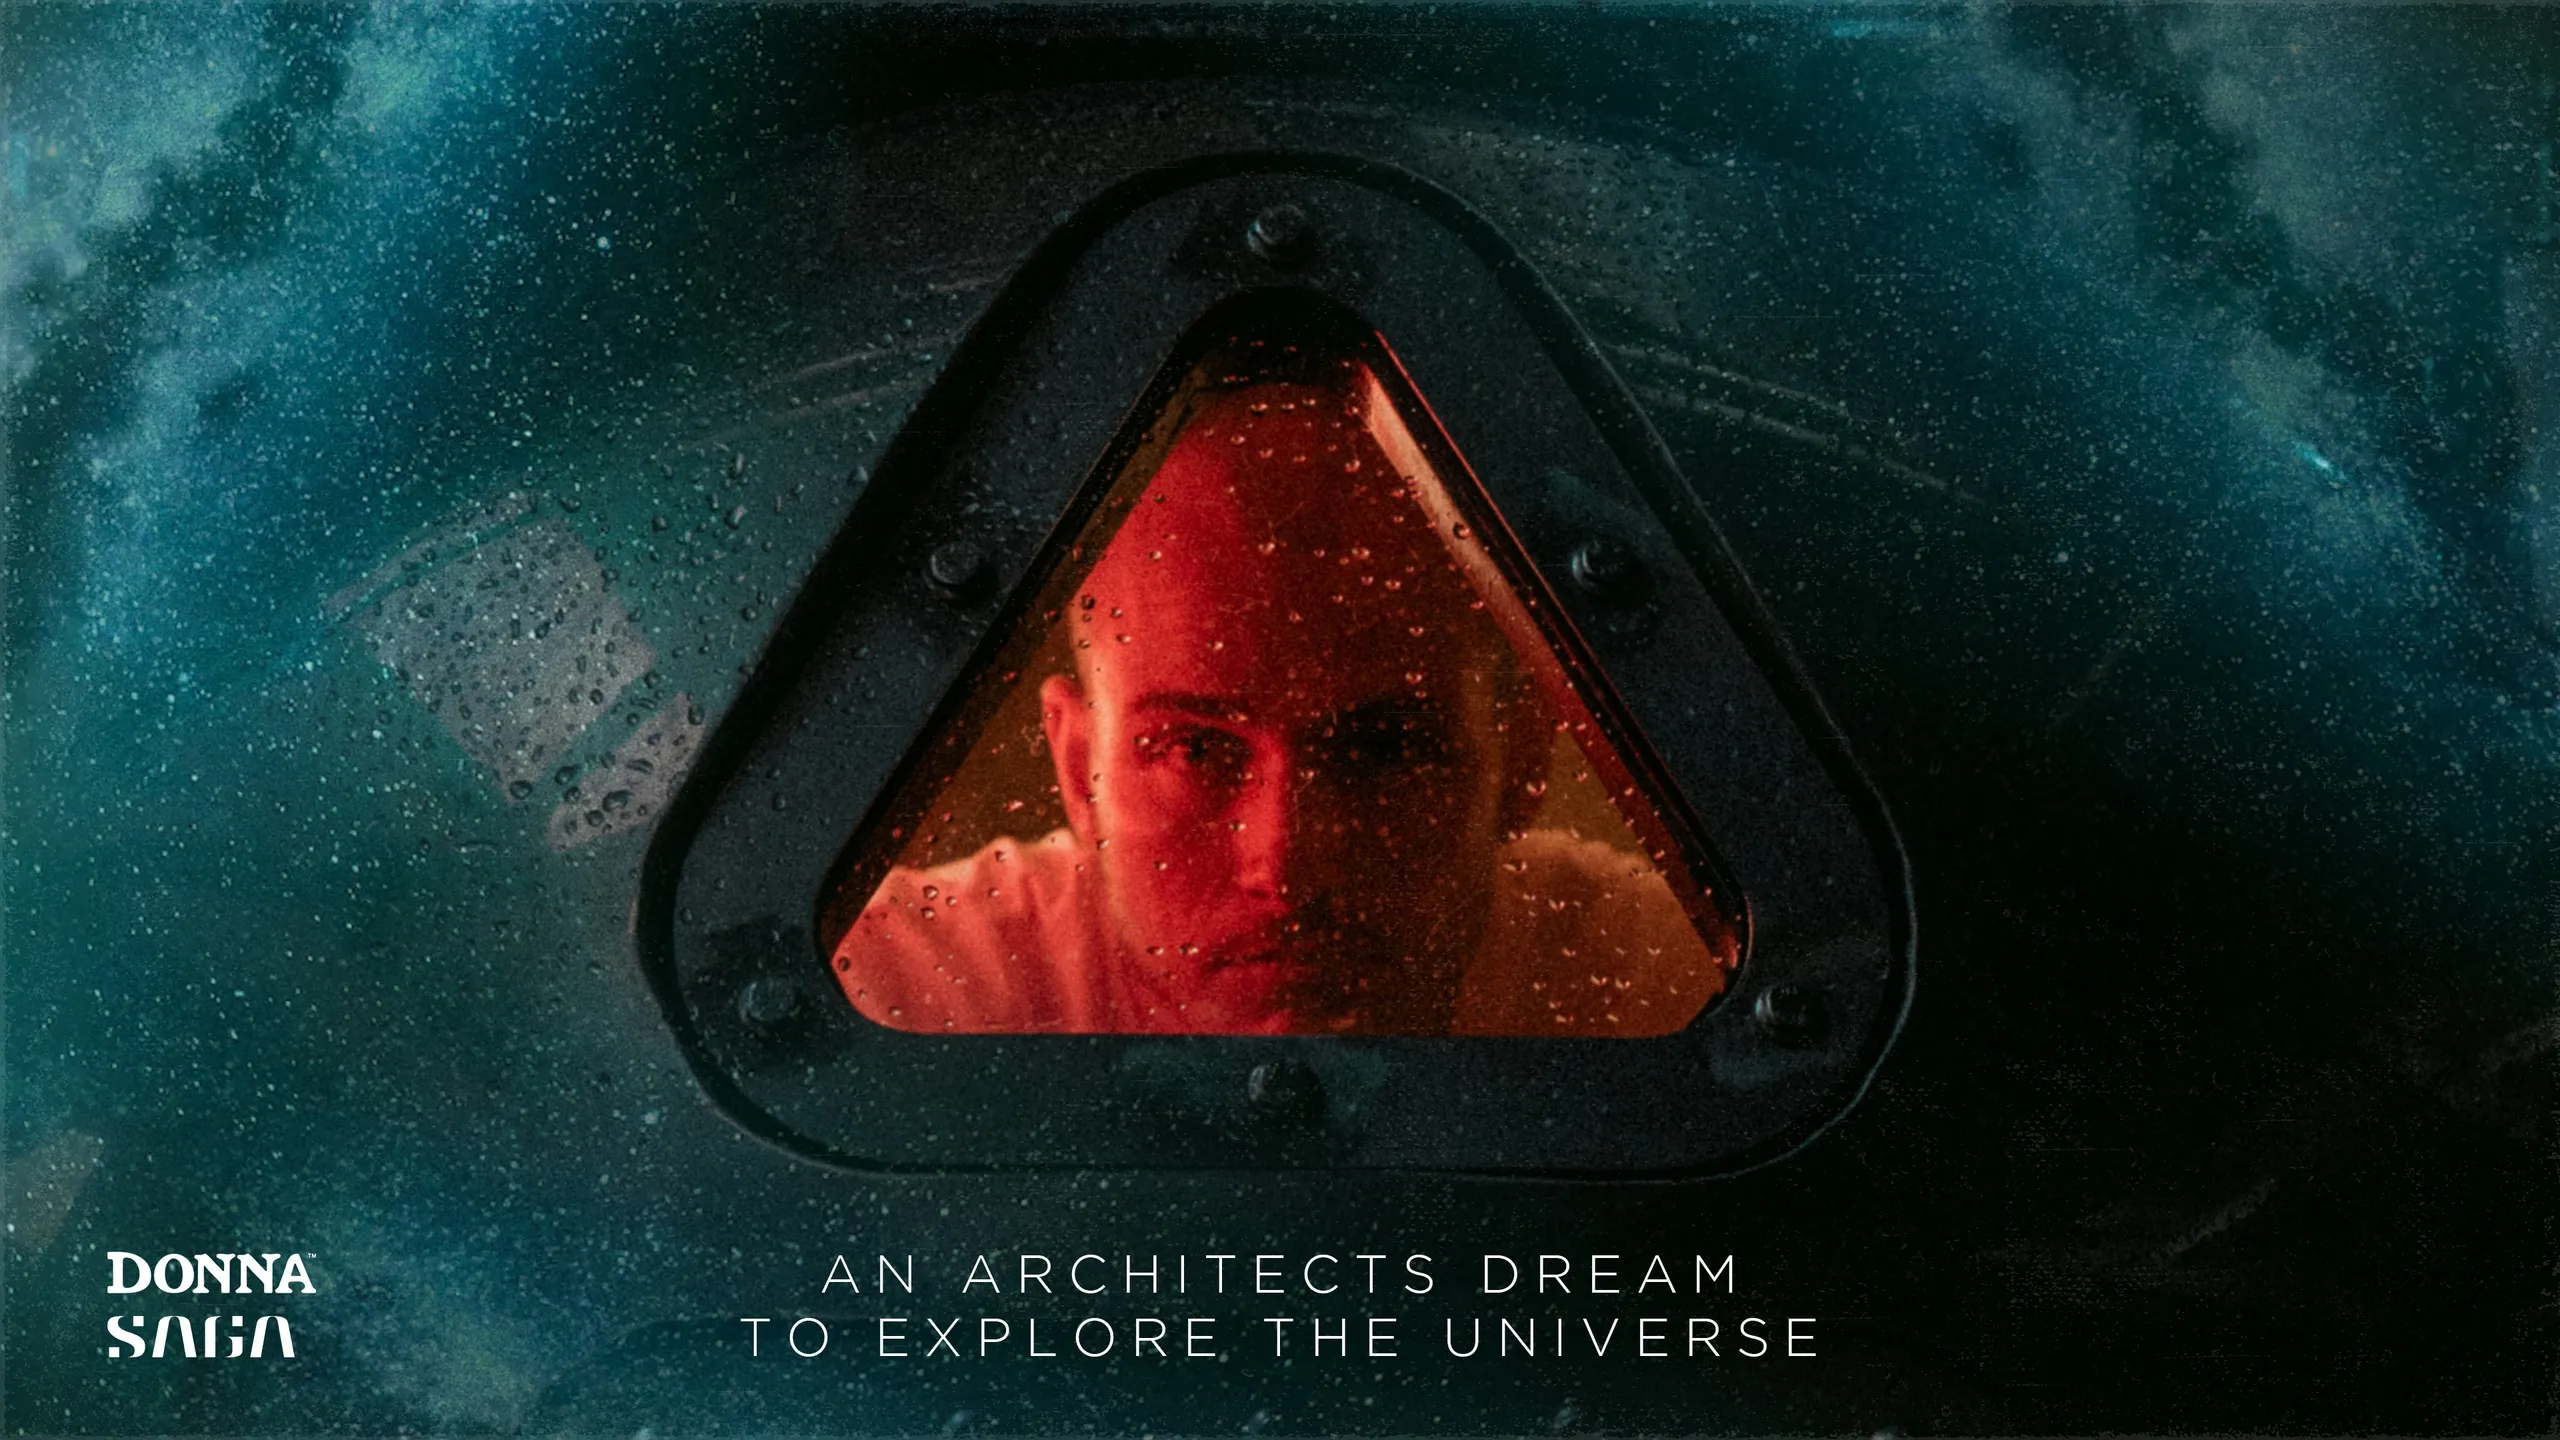 An Architects dream to explore the universe